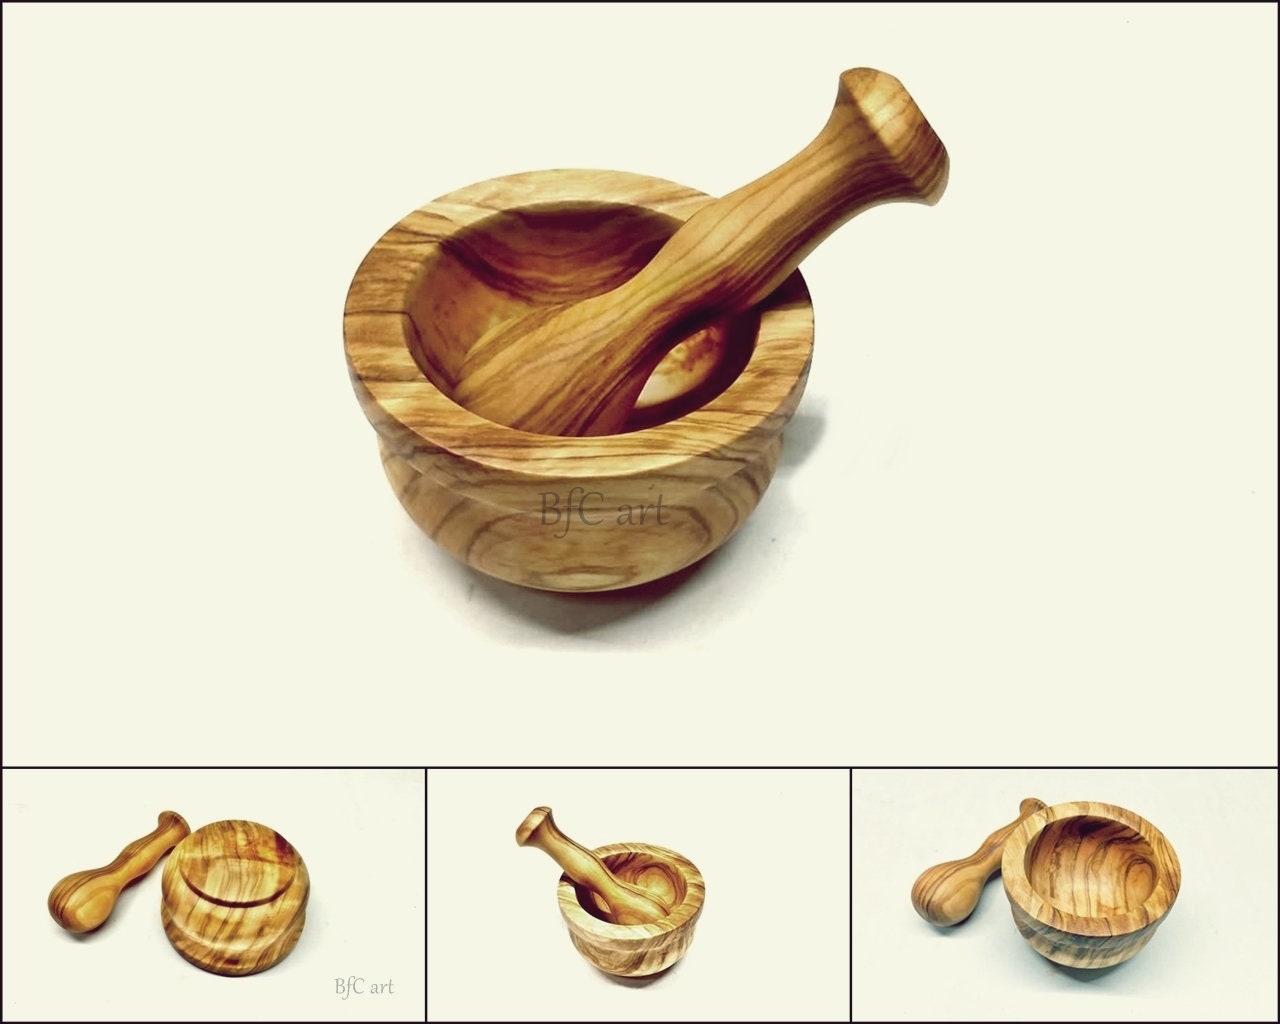 Mortar and Pestle Olive Wood for Cooking, Mortar for Grinding Spices, Vintage Mortar, Wood Mortar and Pestle Set, wood mortar pestle,